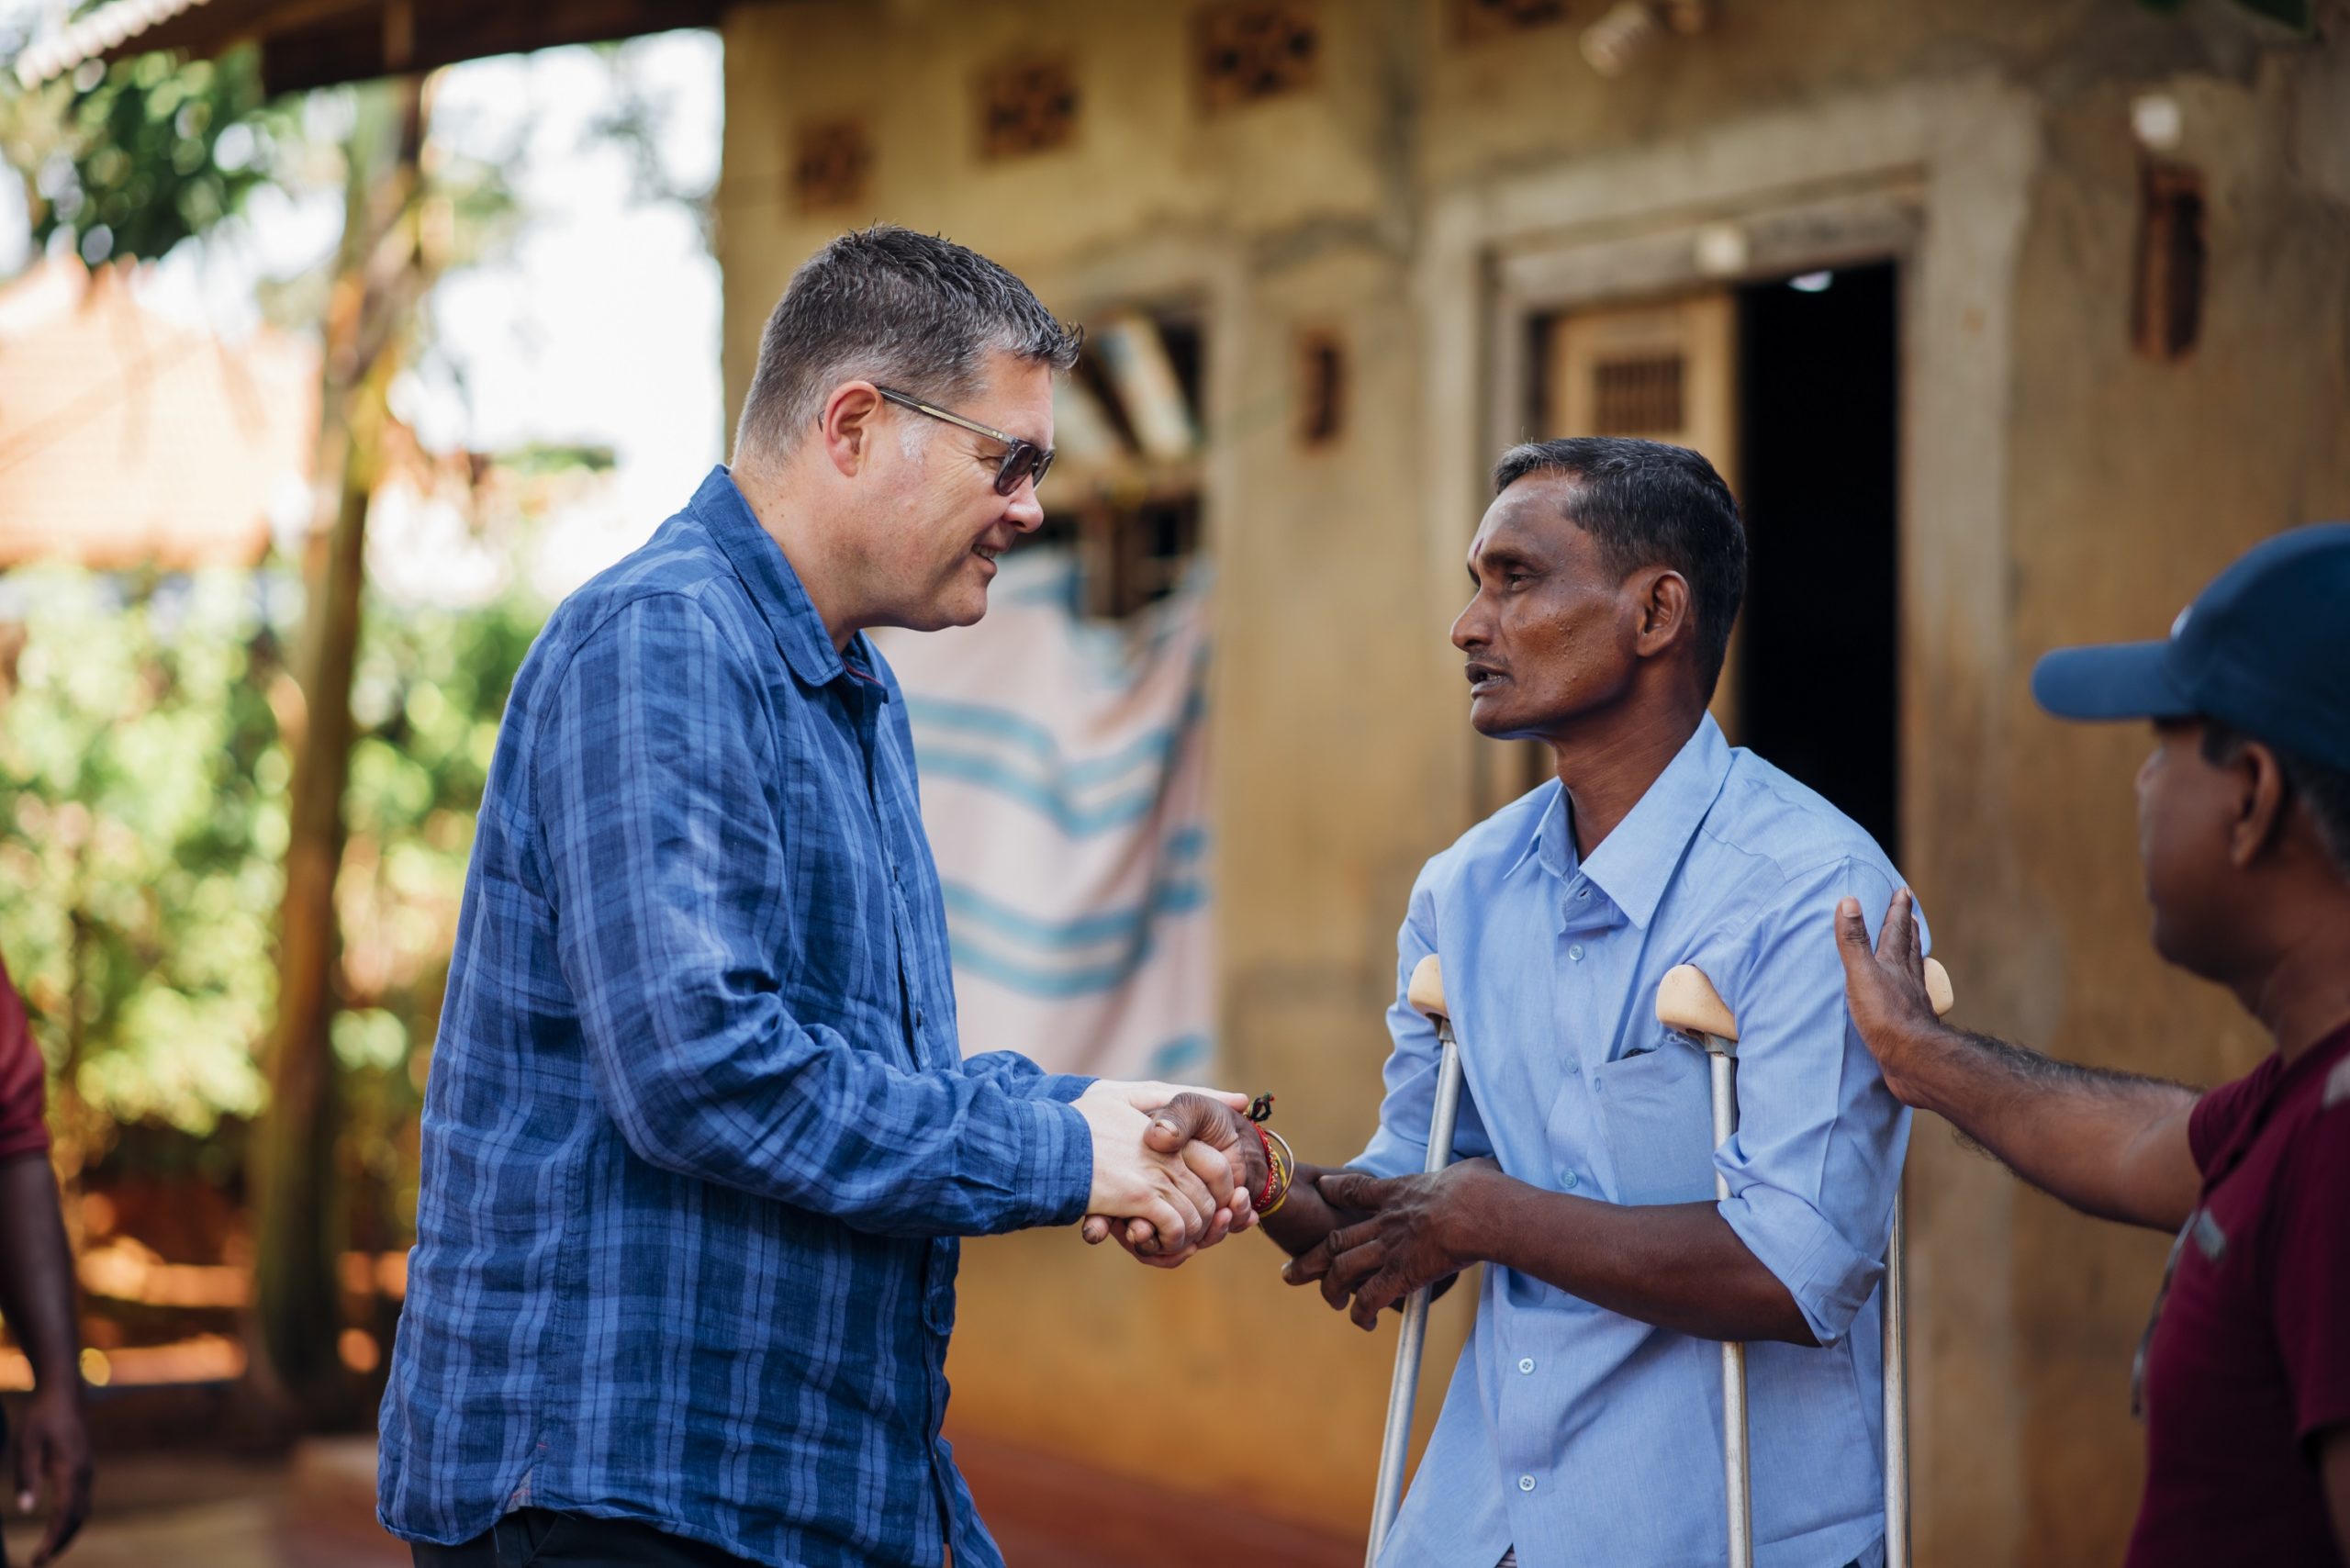 National director of the Leprosy Mission Peter Waddup meets Jegathees, who is cured of leprosy, in Sri Lanka